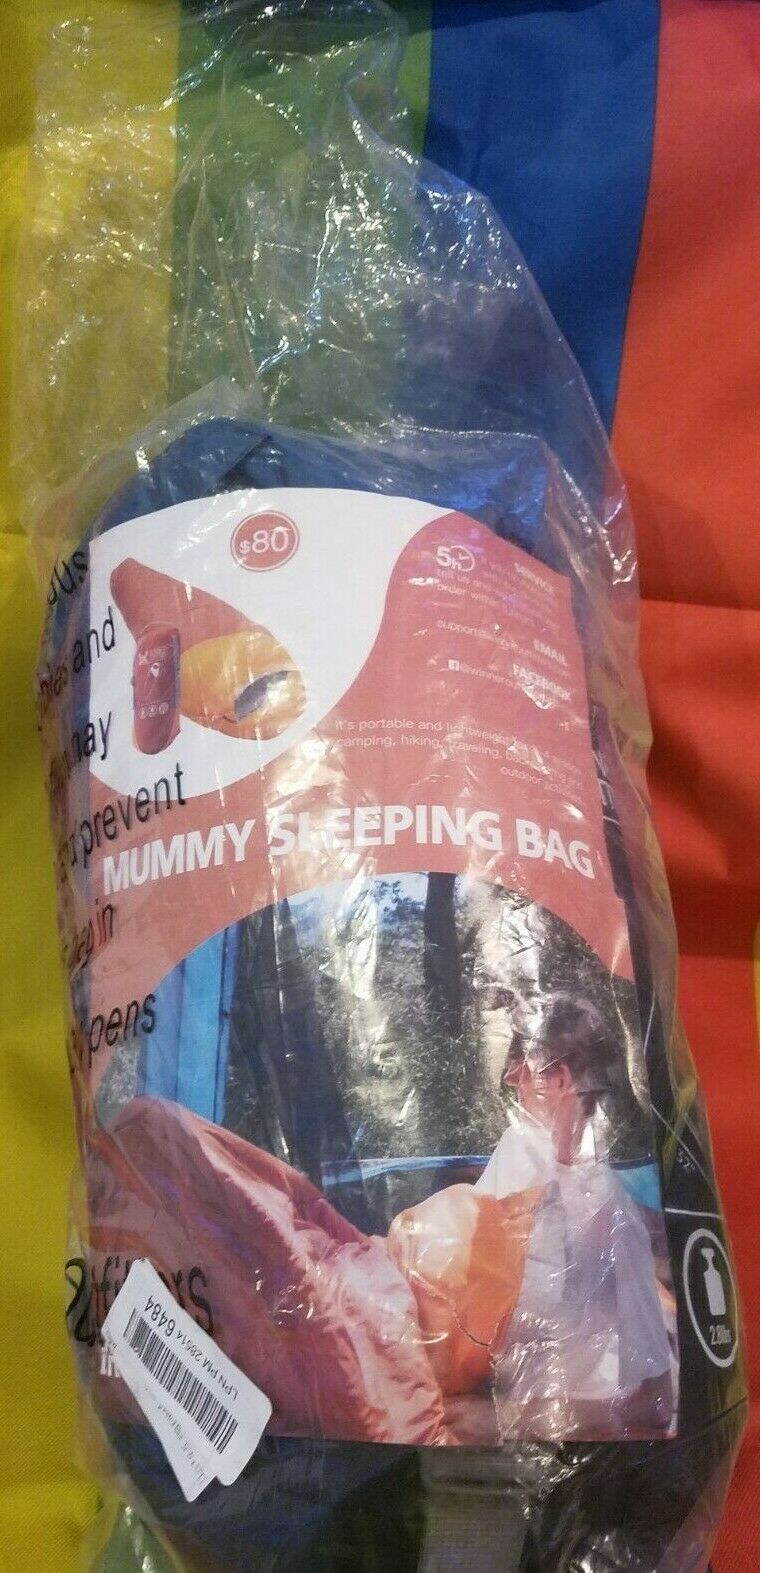 WINNER OUTFITTERS Mummy Sleeping Bag , It's Portable